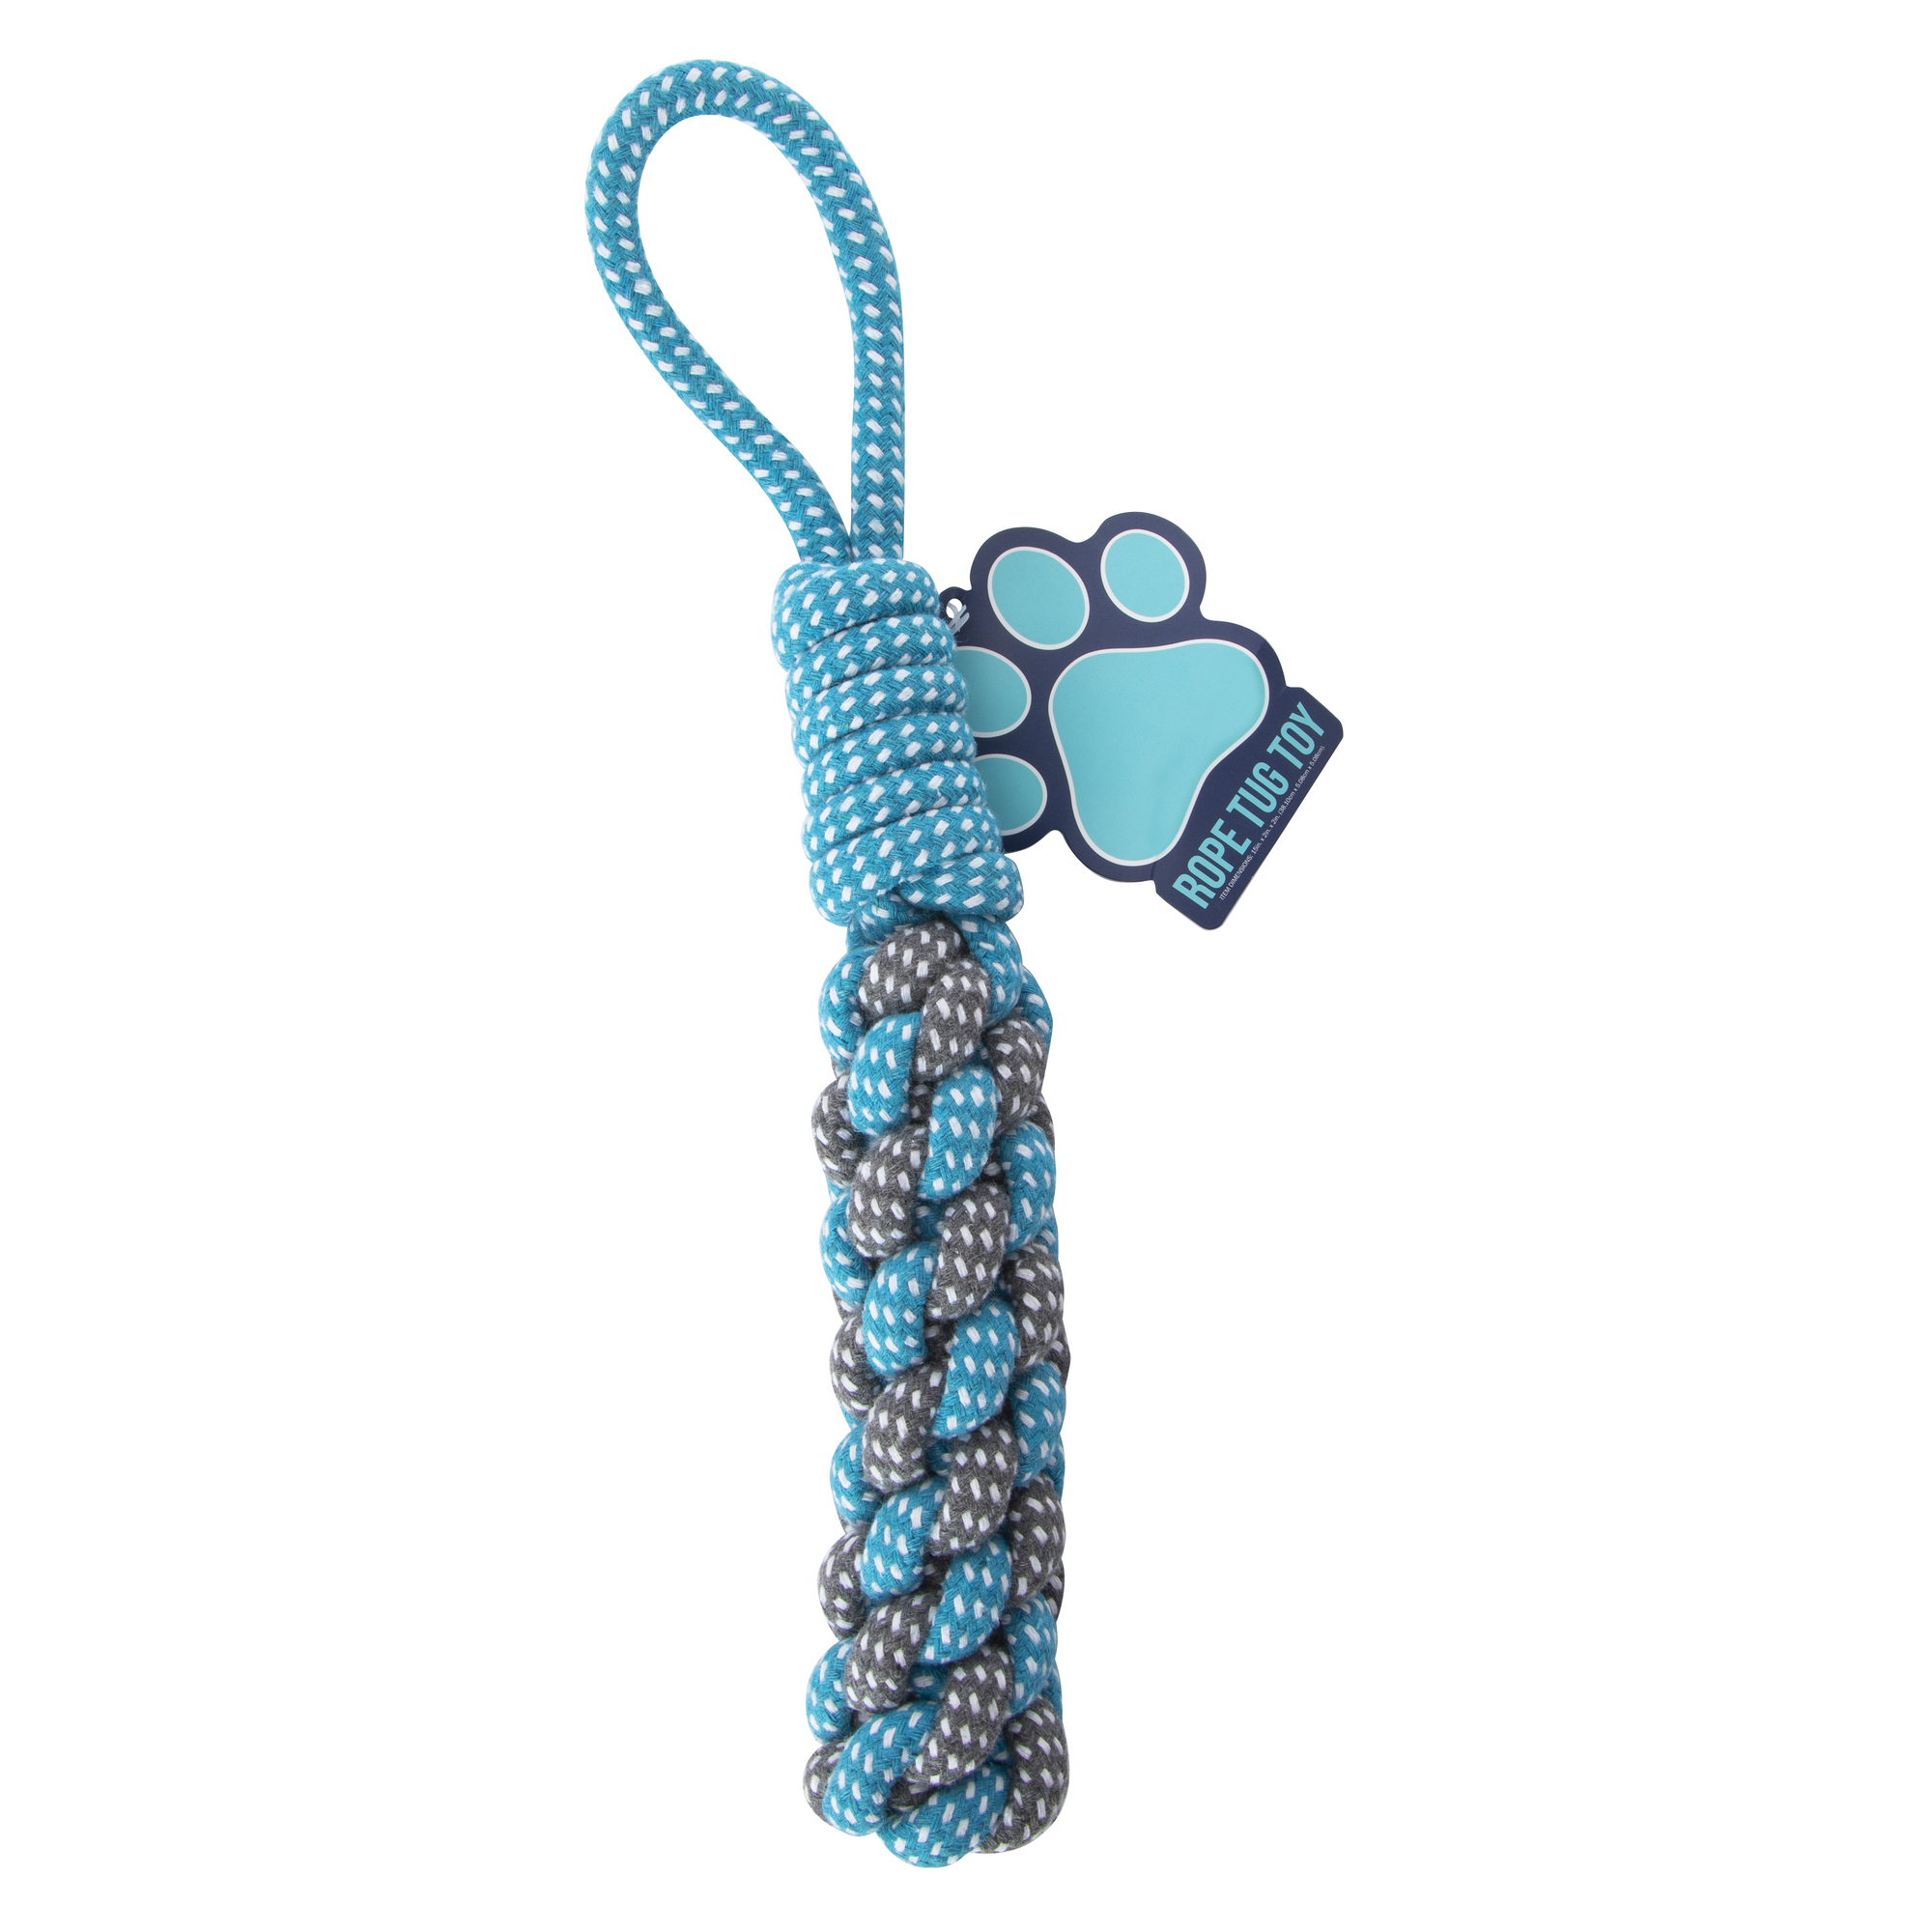 braided rope dog tug toy 15in x 2in